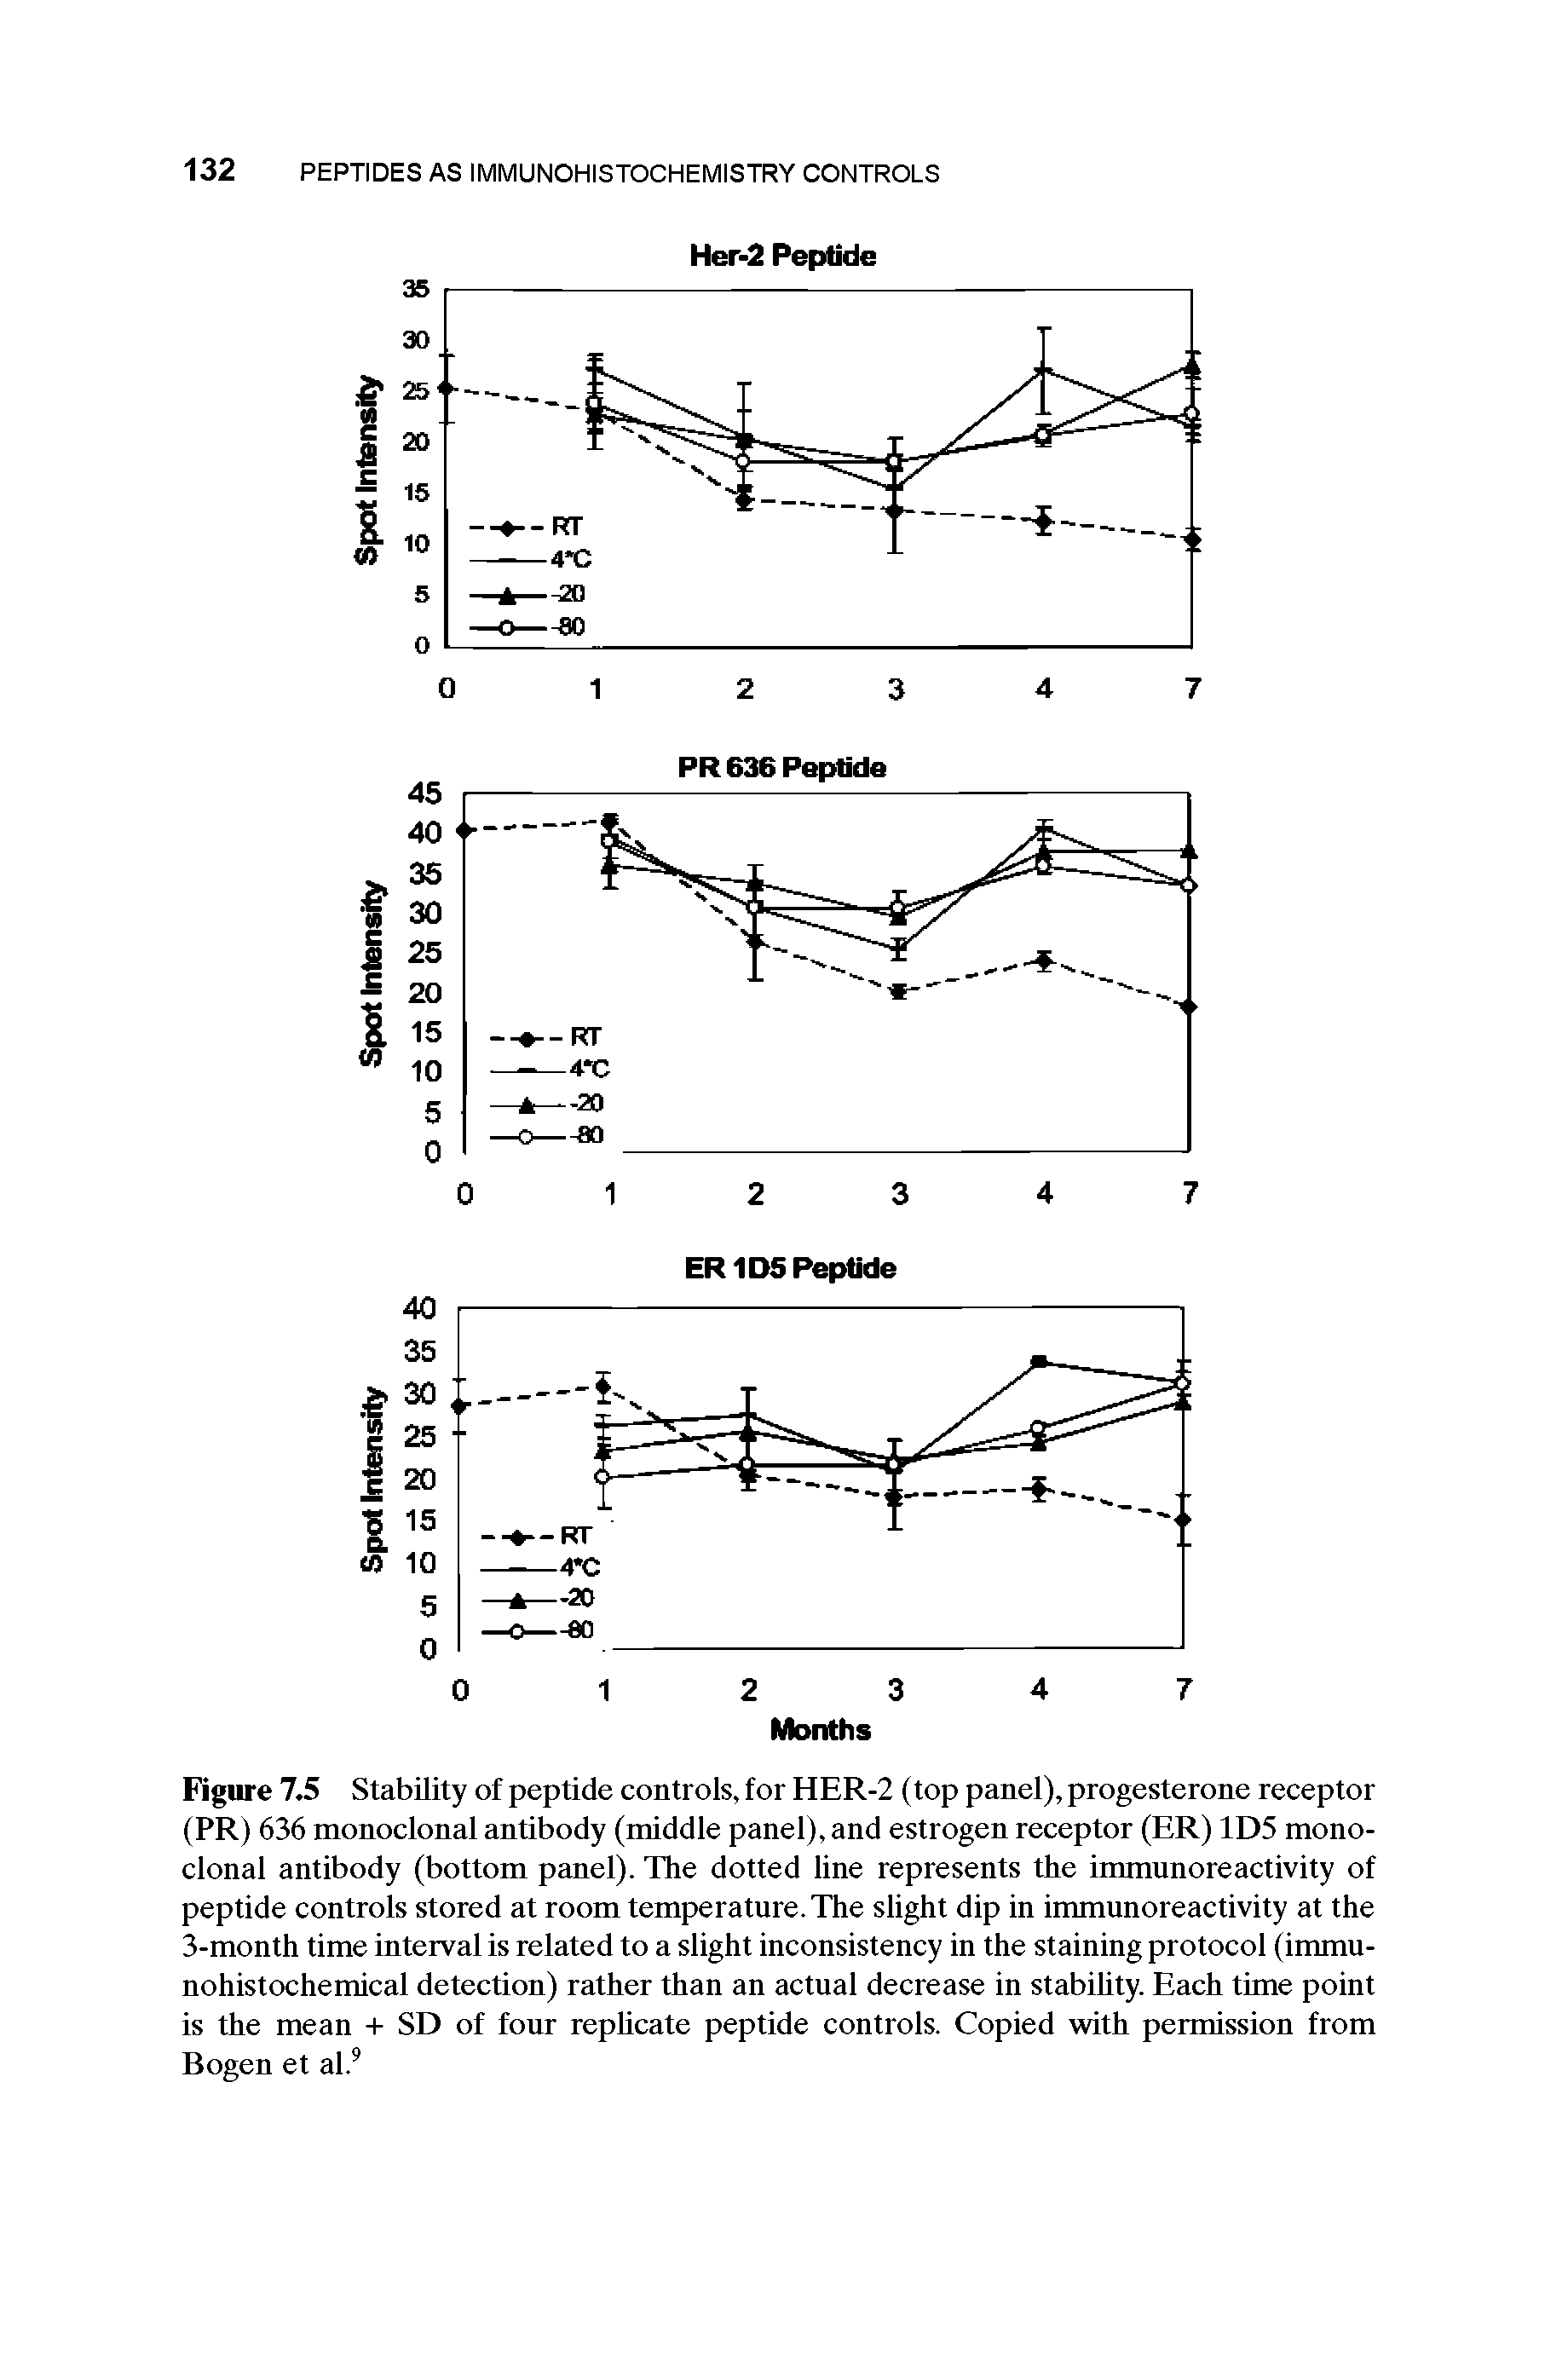 Figure 7.5 Stability of peptide controls, for HER-2 (top panel), progesterone receptor (PR) 636 monoclonal antibody (middle panel), and estrogen receptor (ER) 1D5 monoclonal antibody (bottom panel). The dotted line represents the immunoreactivity of peptide controls stored at room temperature. The slight dip in immunoreactivity at the 3-month time interval is related to a slight inconsistency in the staining protocol (immu-nohistochemical detection) rather than an actual decrease in stability. Each time point is the mean + SD of four replicate peptide controls. Copied with permission from Bogen et al.9...